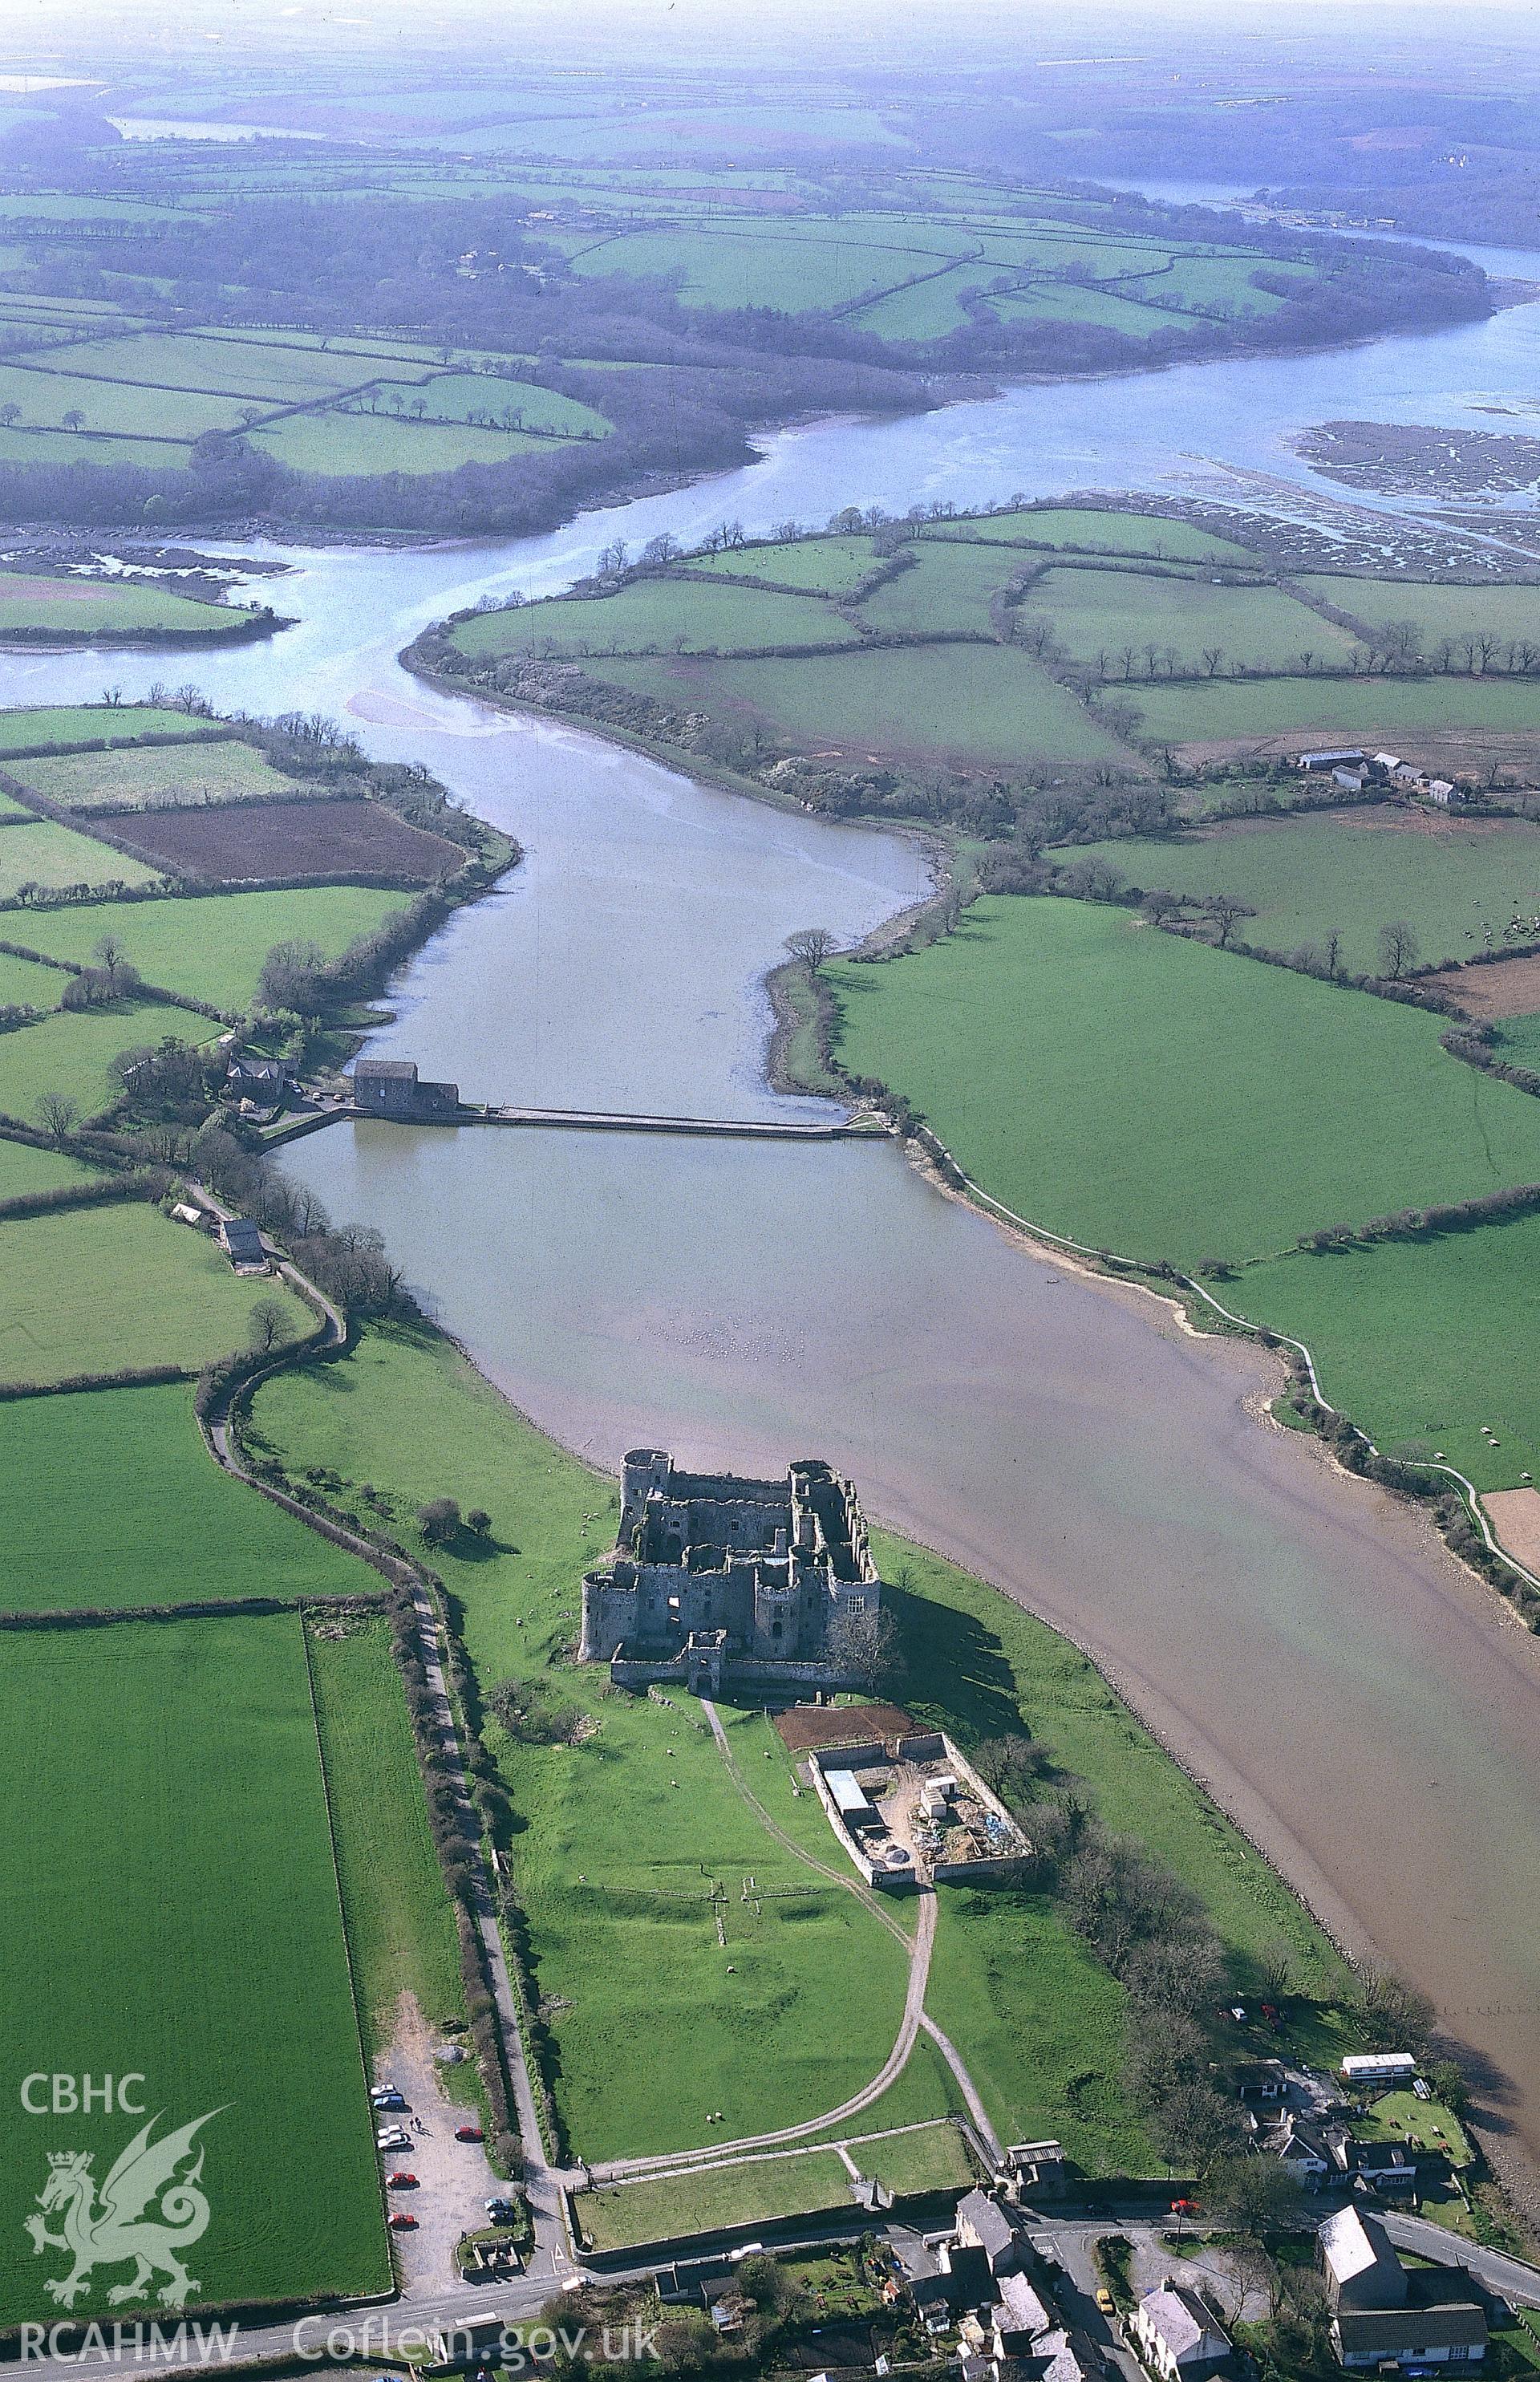 RCAHMW colour oblique aerial photograph of Carew Castle and area. Taken by C R Musson on 13/04/1995